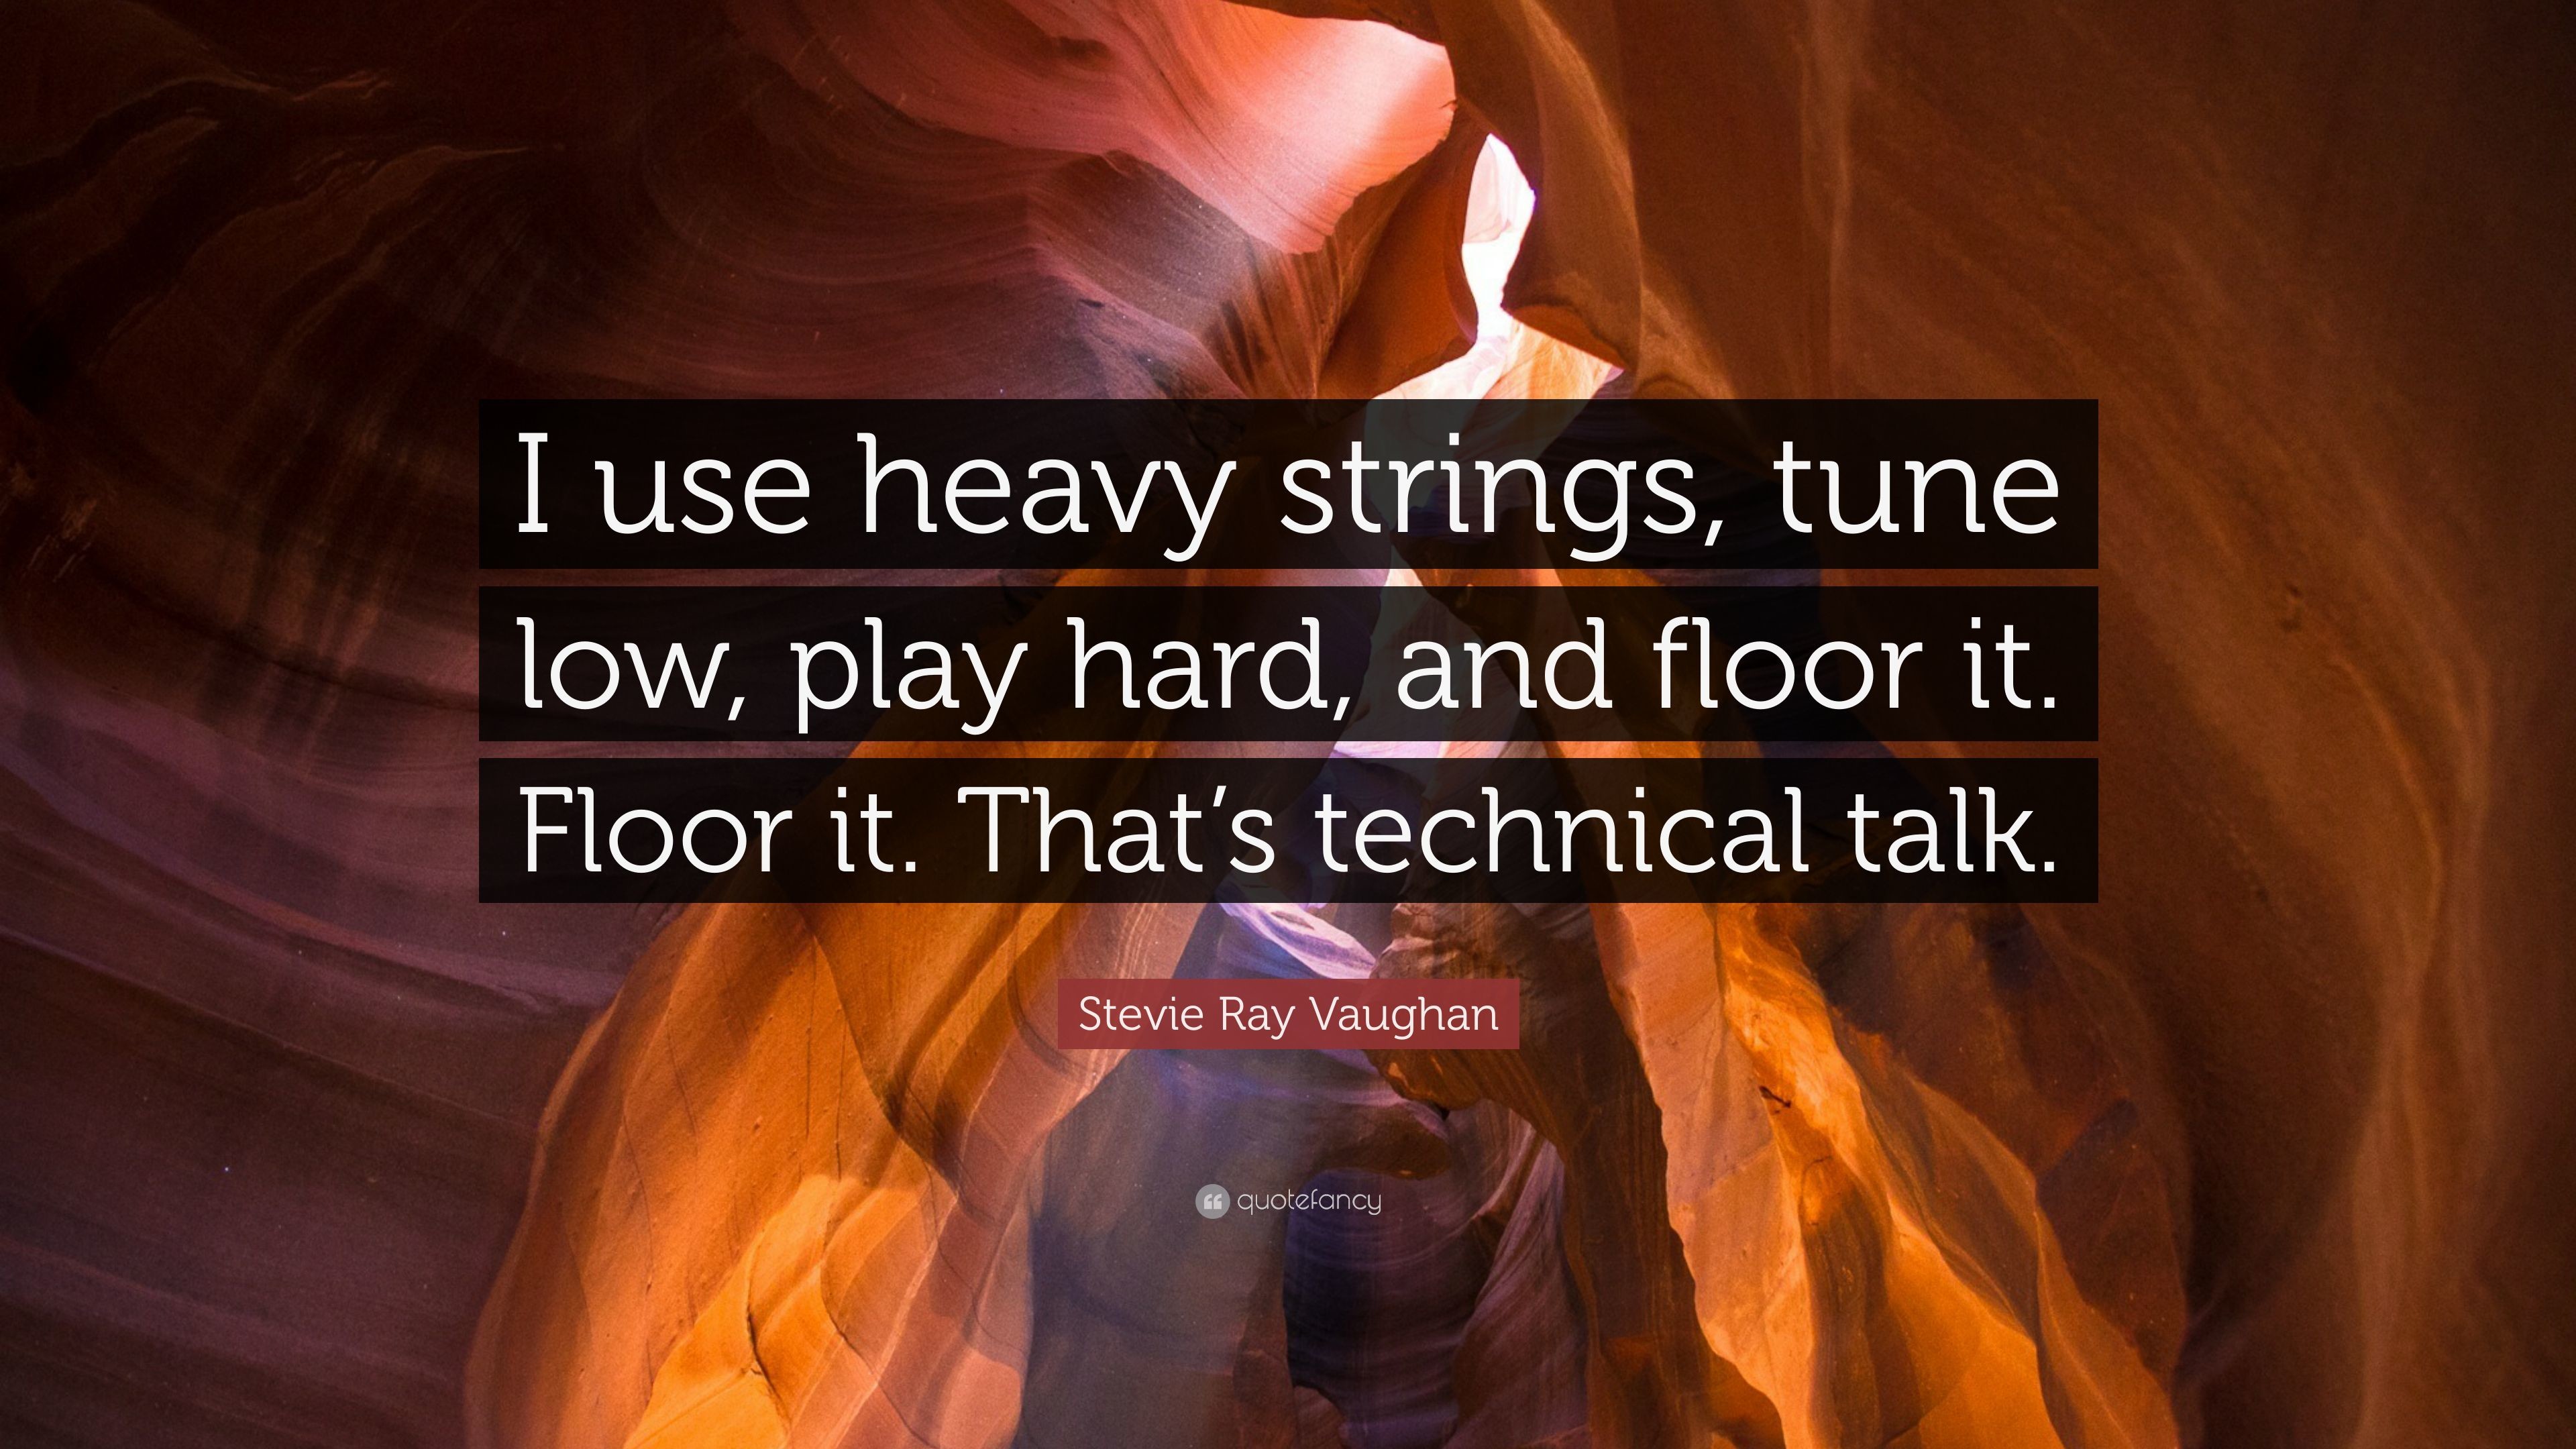 3840x2160 Stevie Ray Vaughan Quote: “I use heavy strings, tune low, play hard